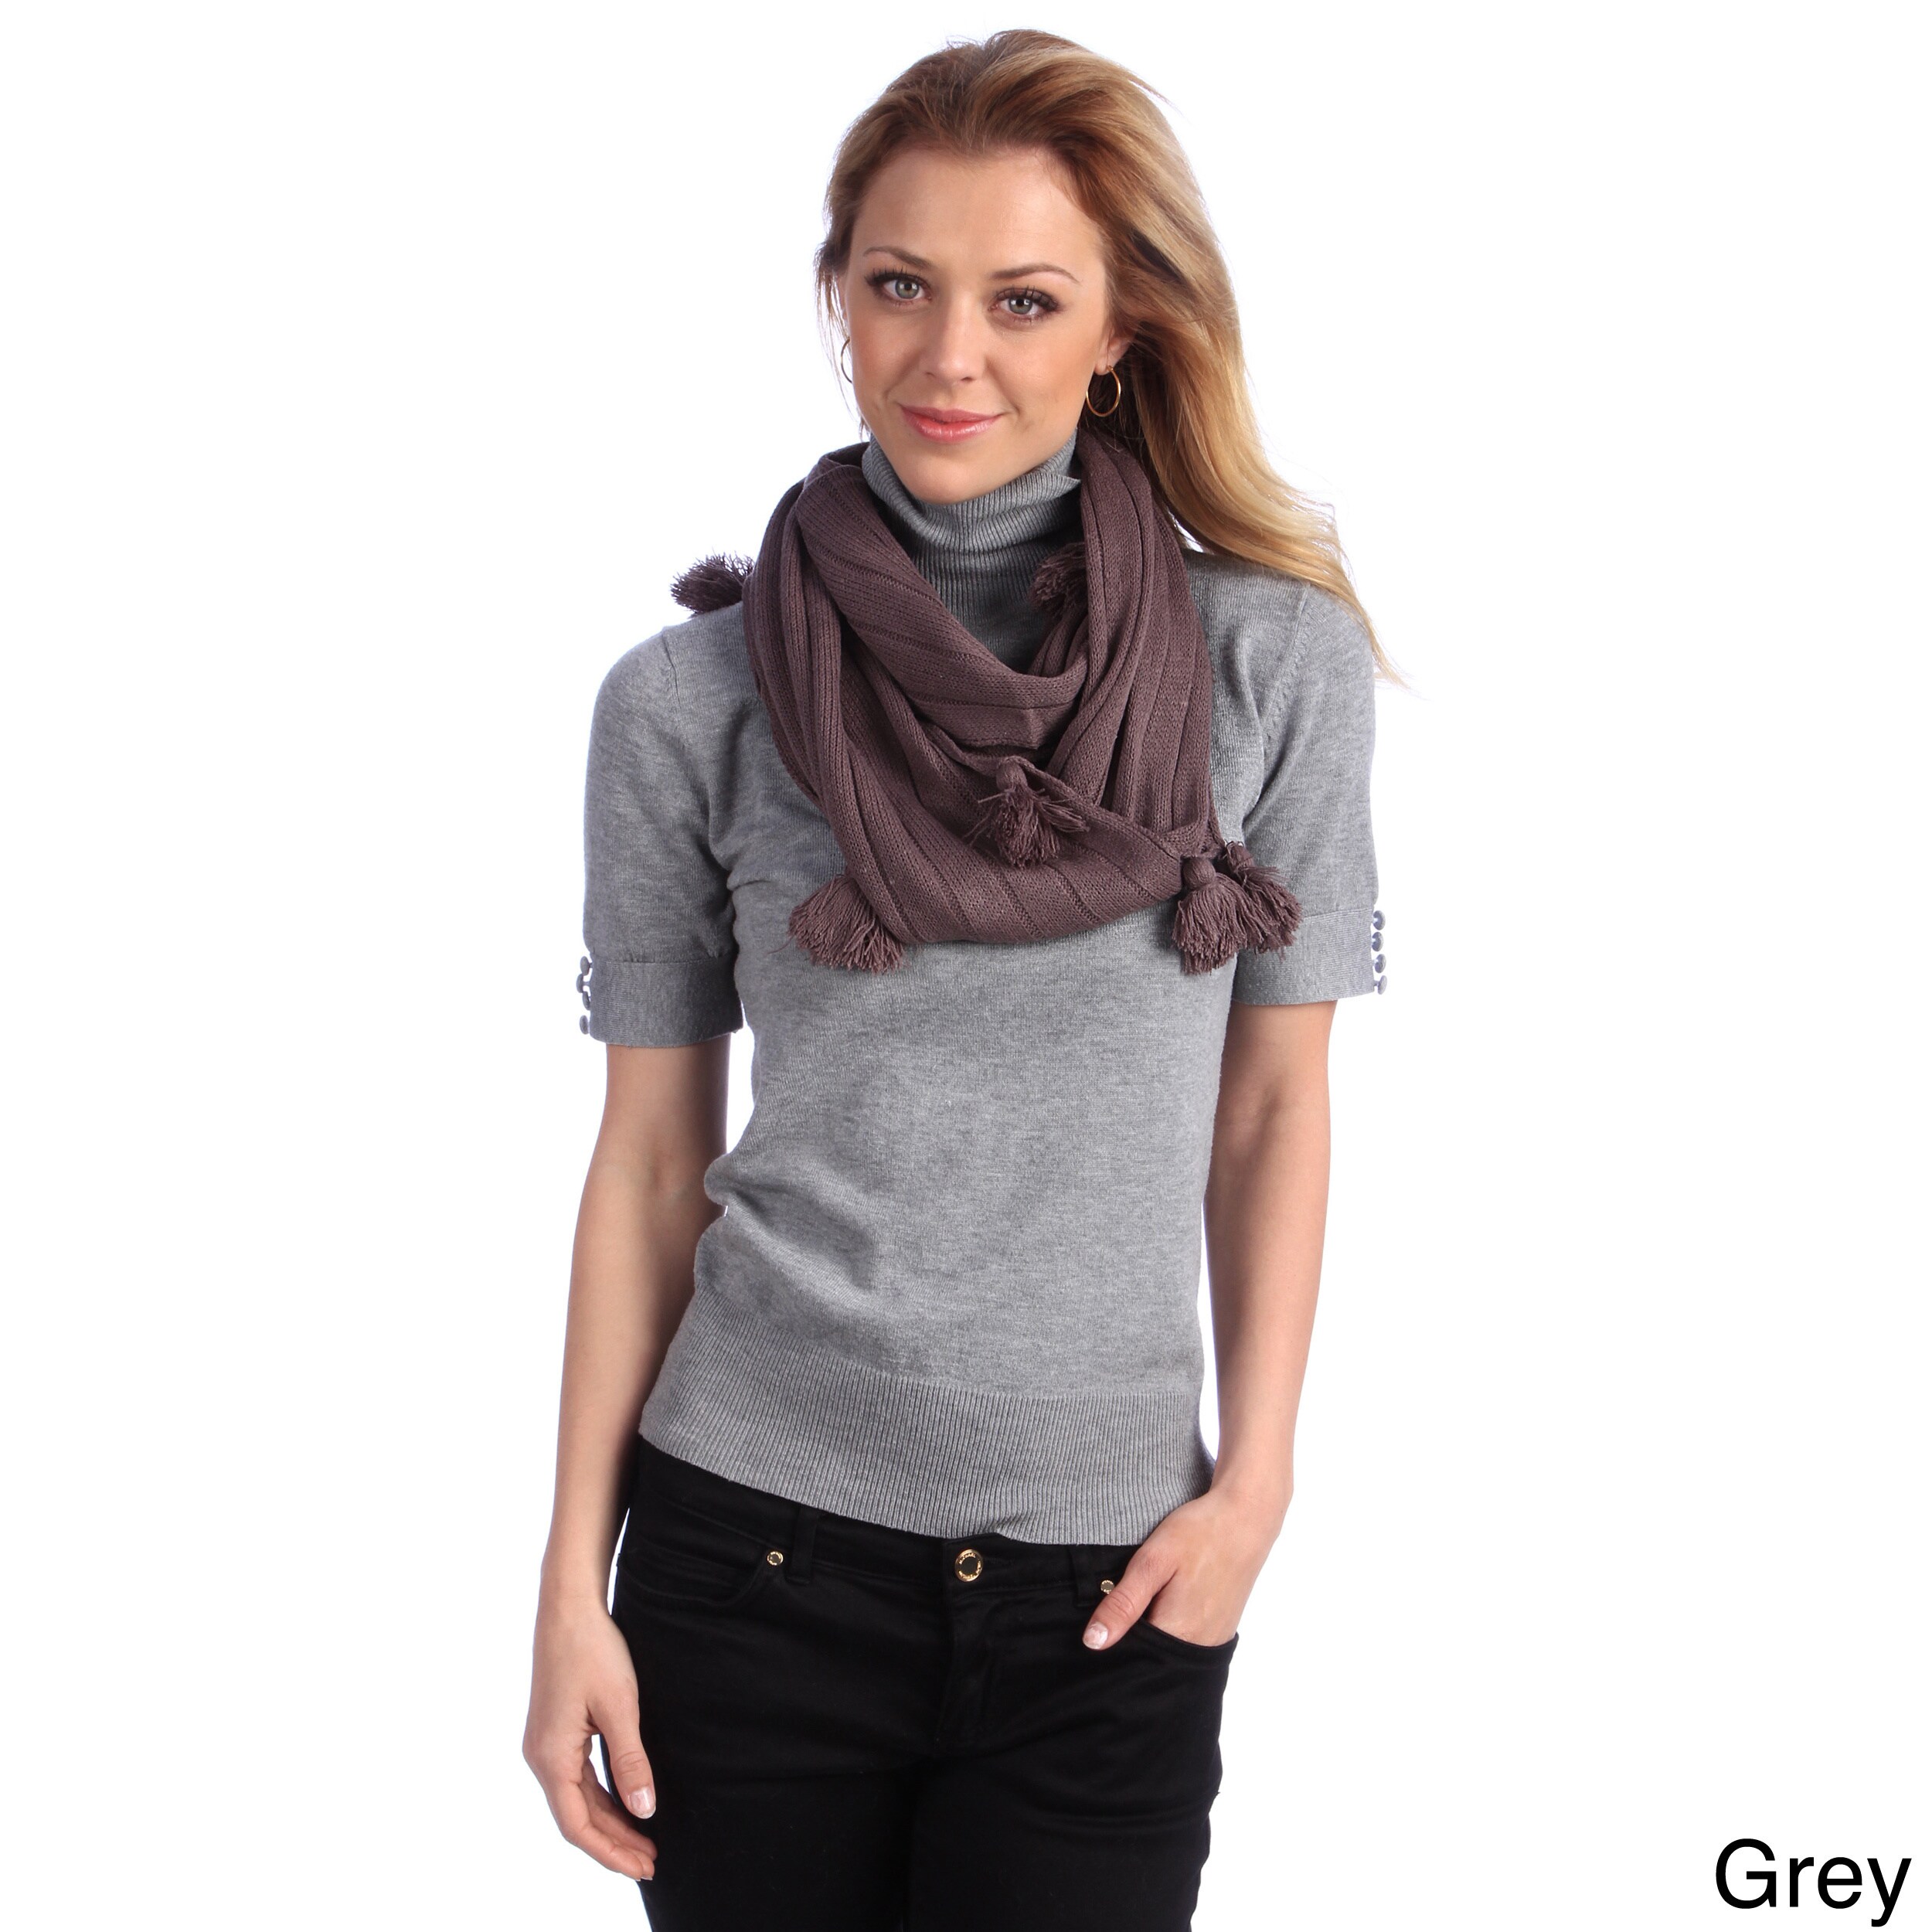 Womens Tassel Accent Infinity Scarf